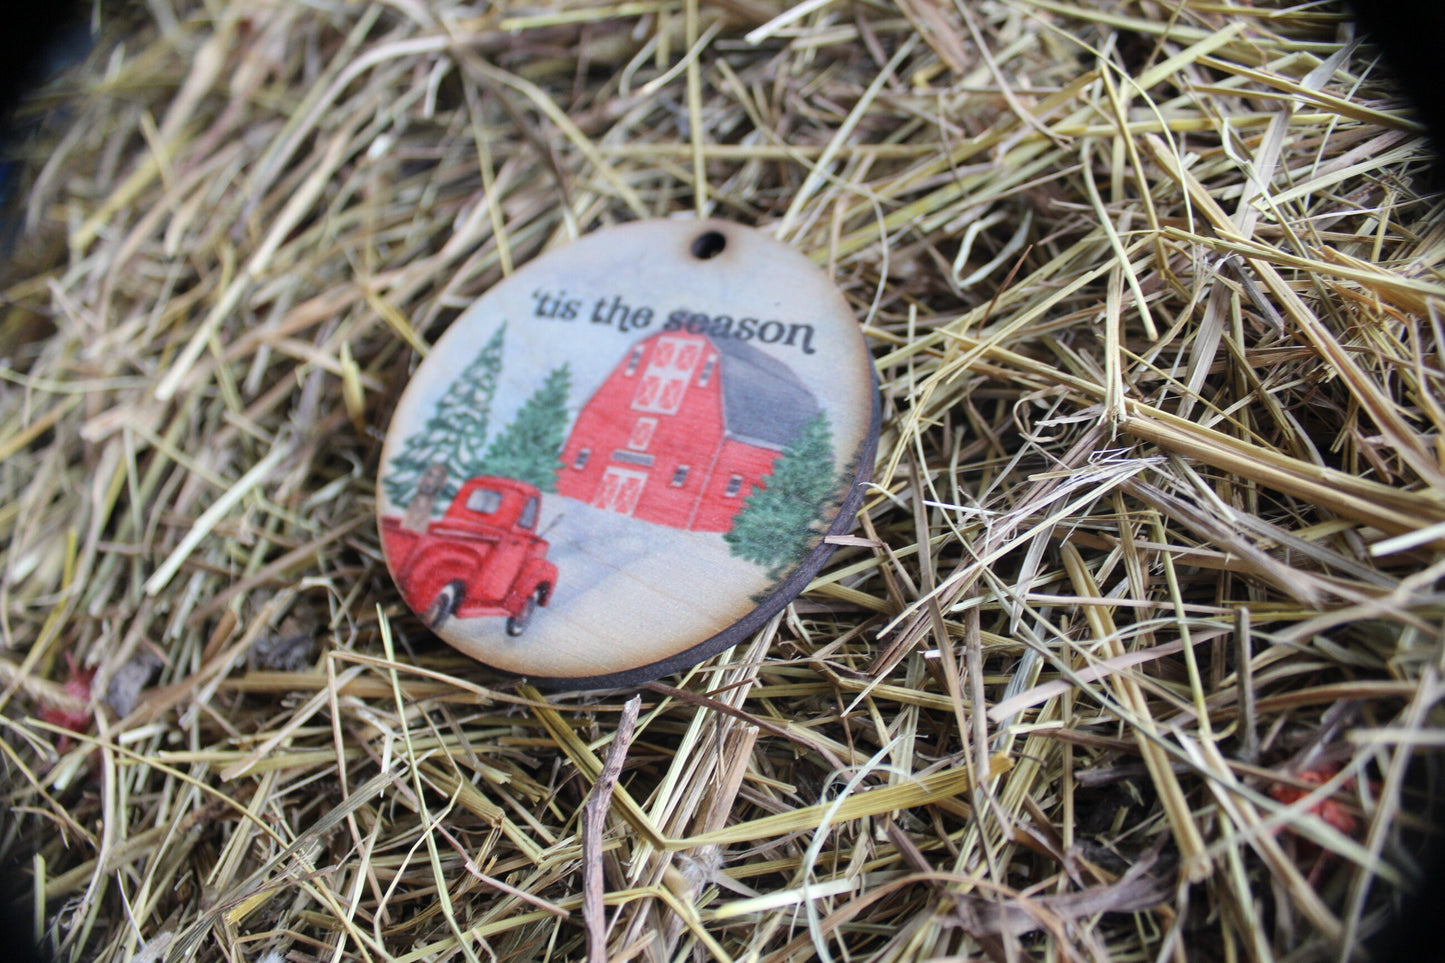 Tis The Season Little Truck Barn Red Winter Christmas Holiday Ornament KeyChain Gift Tag Woodslice Round Printed Image Winter Scene Vintage